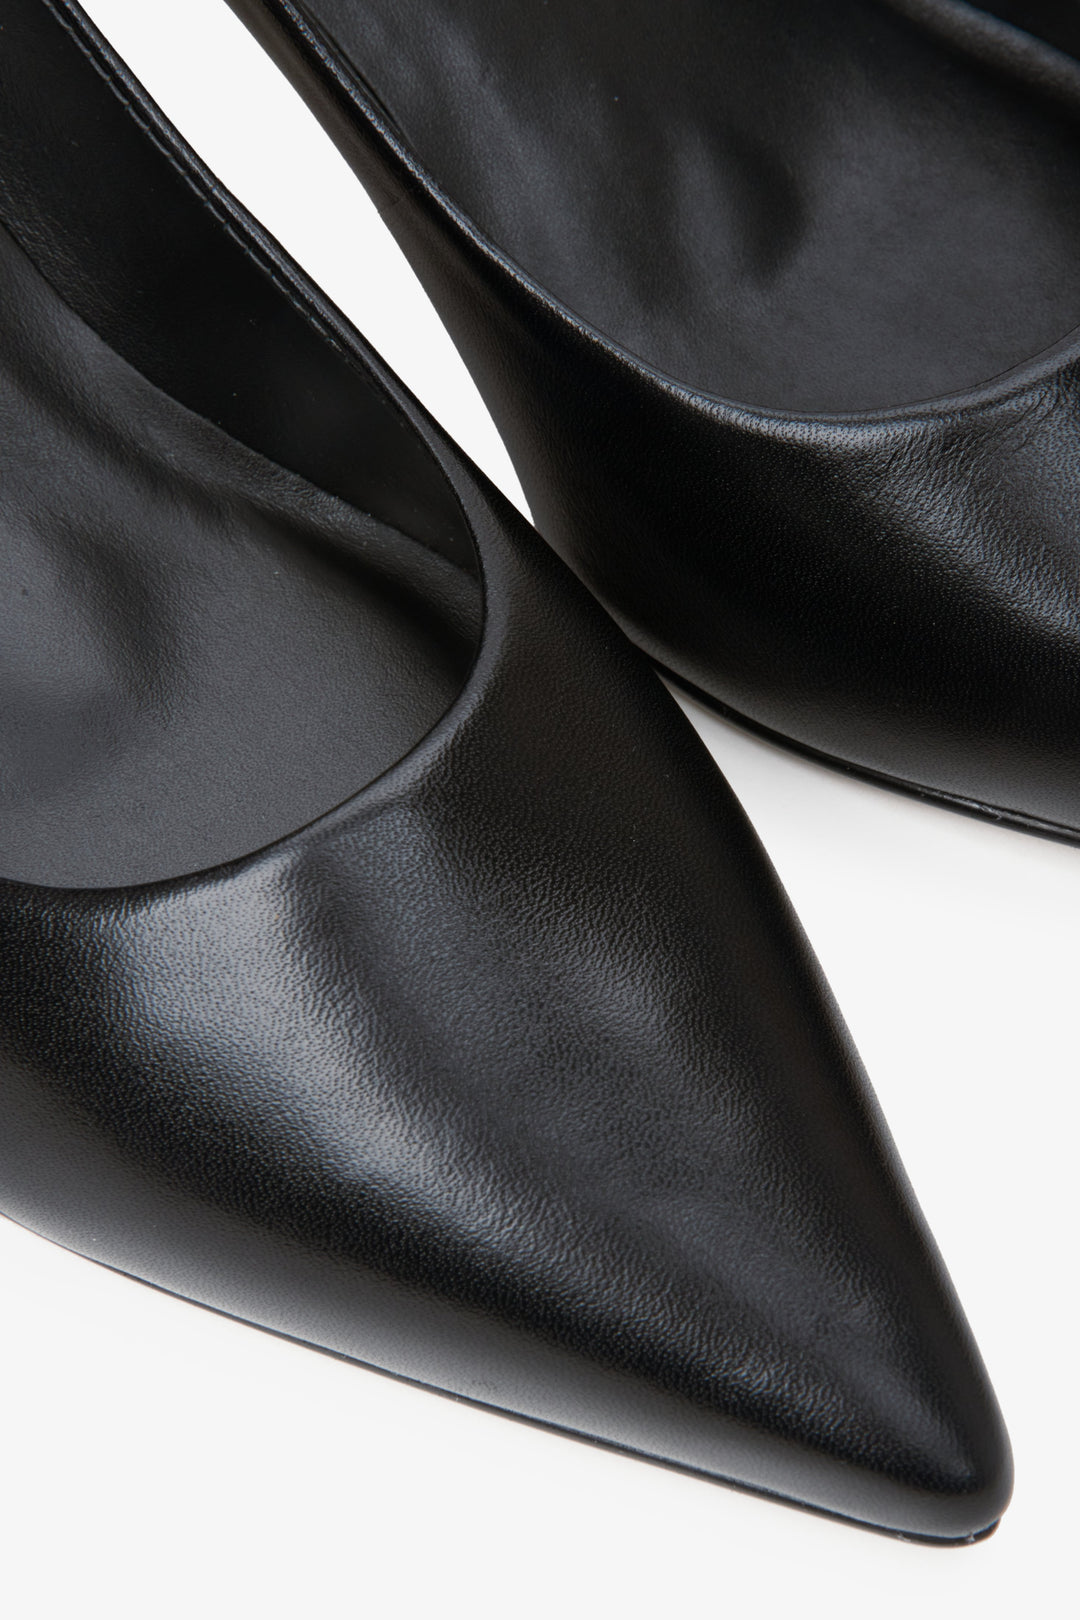 Women's black leather pumps by Estro - close-up of the heel and the stitching line.